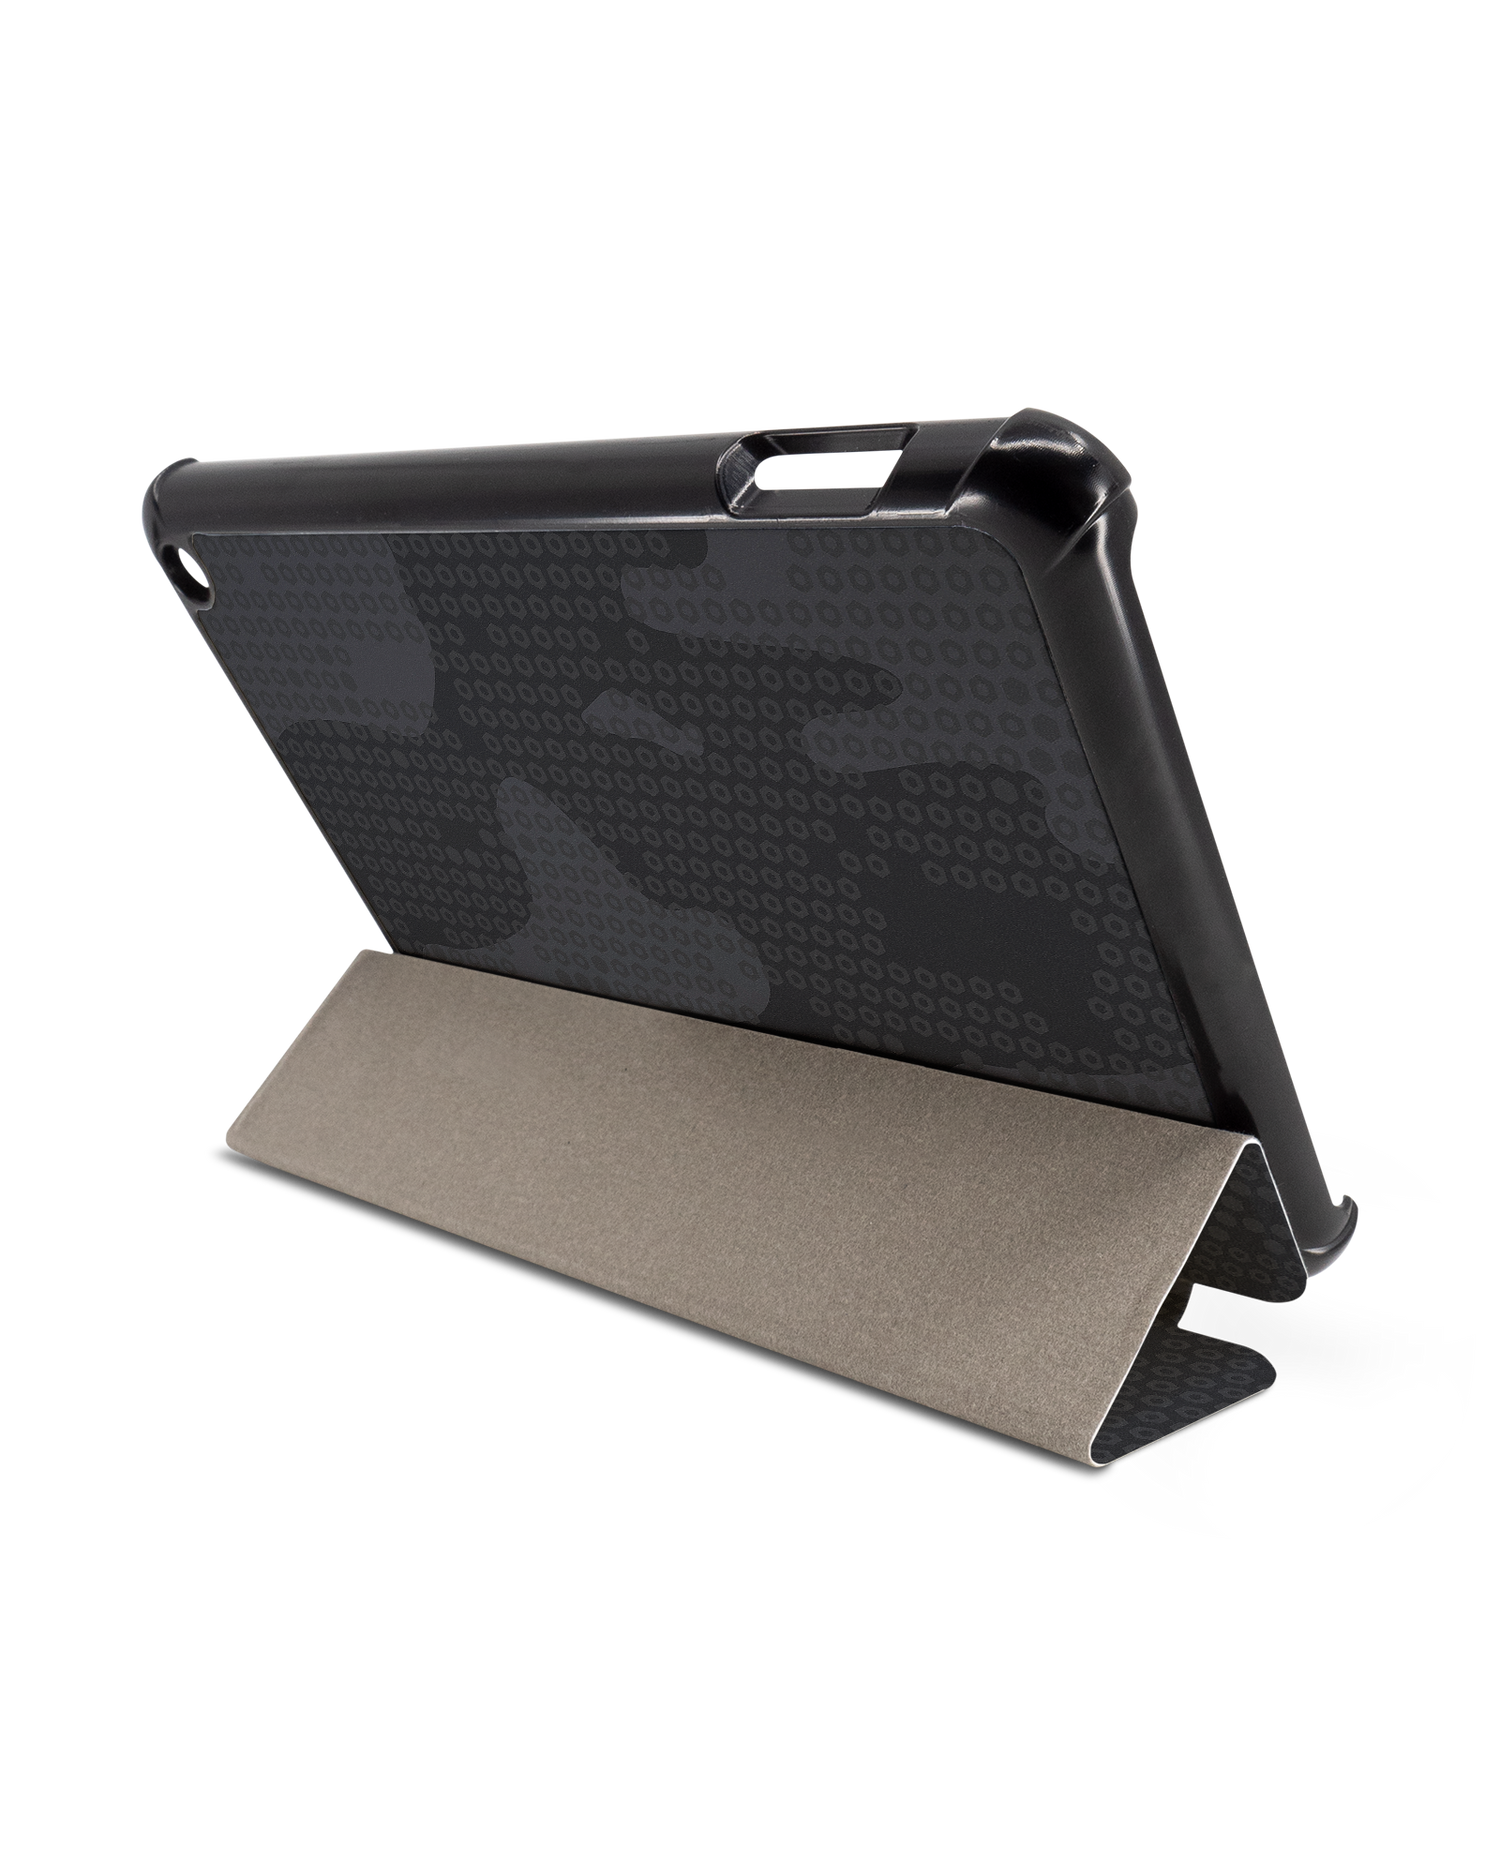 Spec Ops Dark Tablet Smart Case for Amazon Fire 7 (2022): Used as Stand